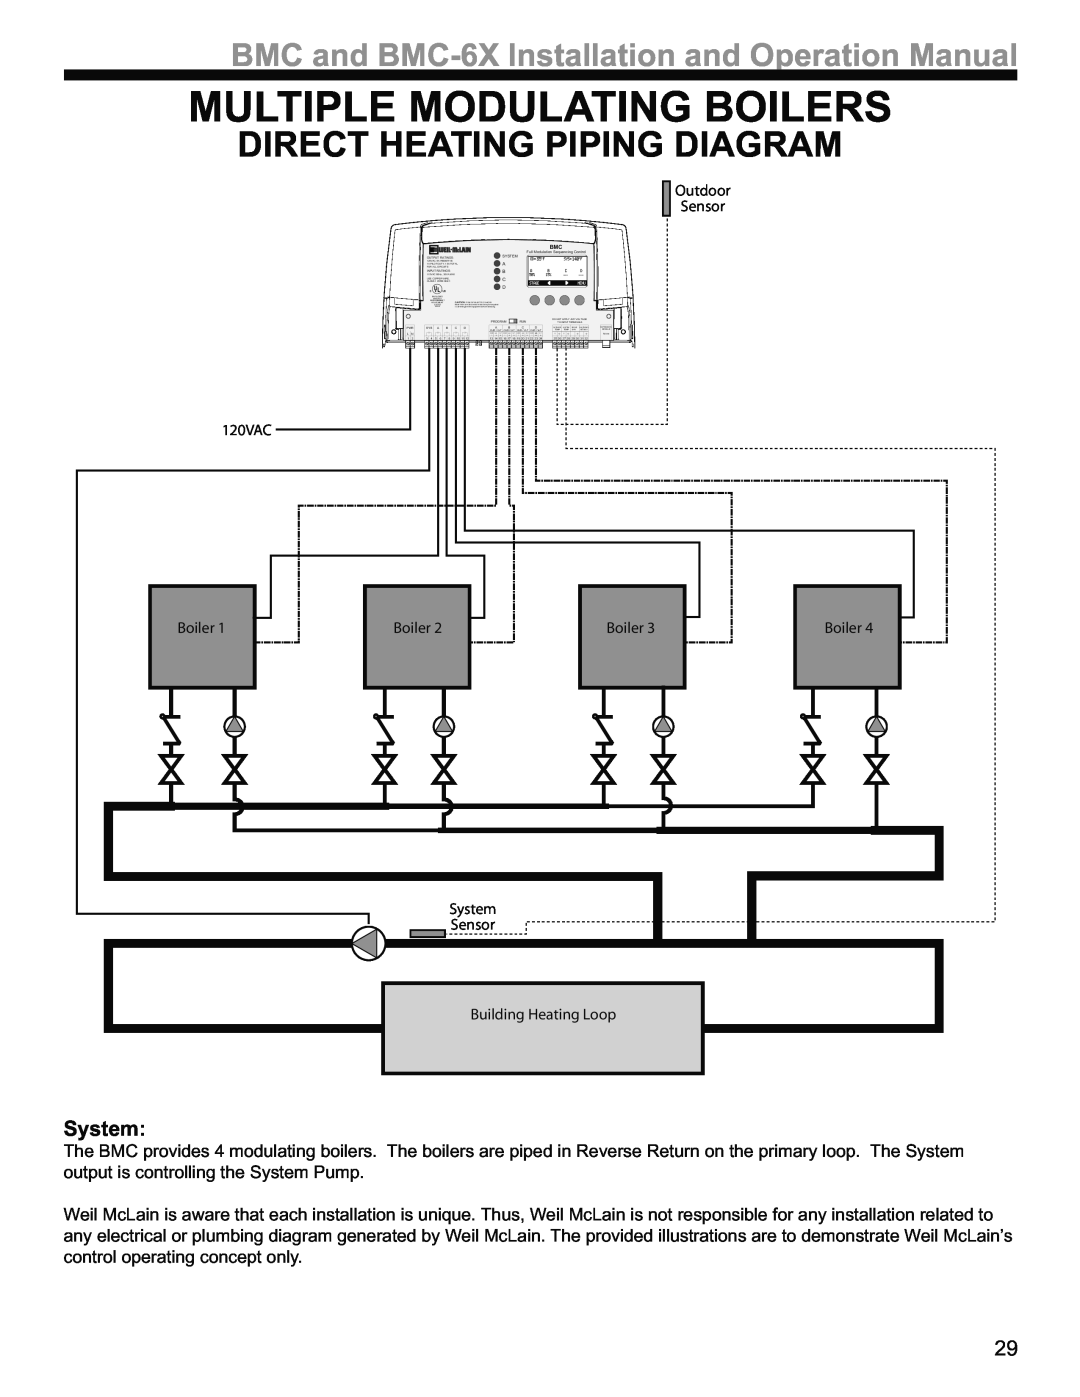 Weil-McLain BMC-6X operation manual Multiple Modulating Boilers, Direct Heating Piping Diagram, System 